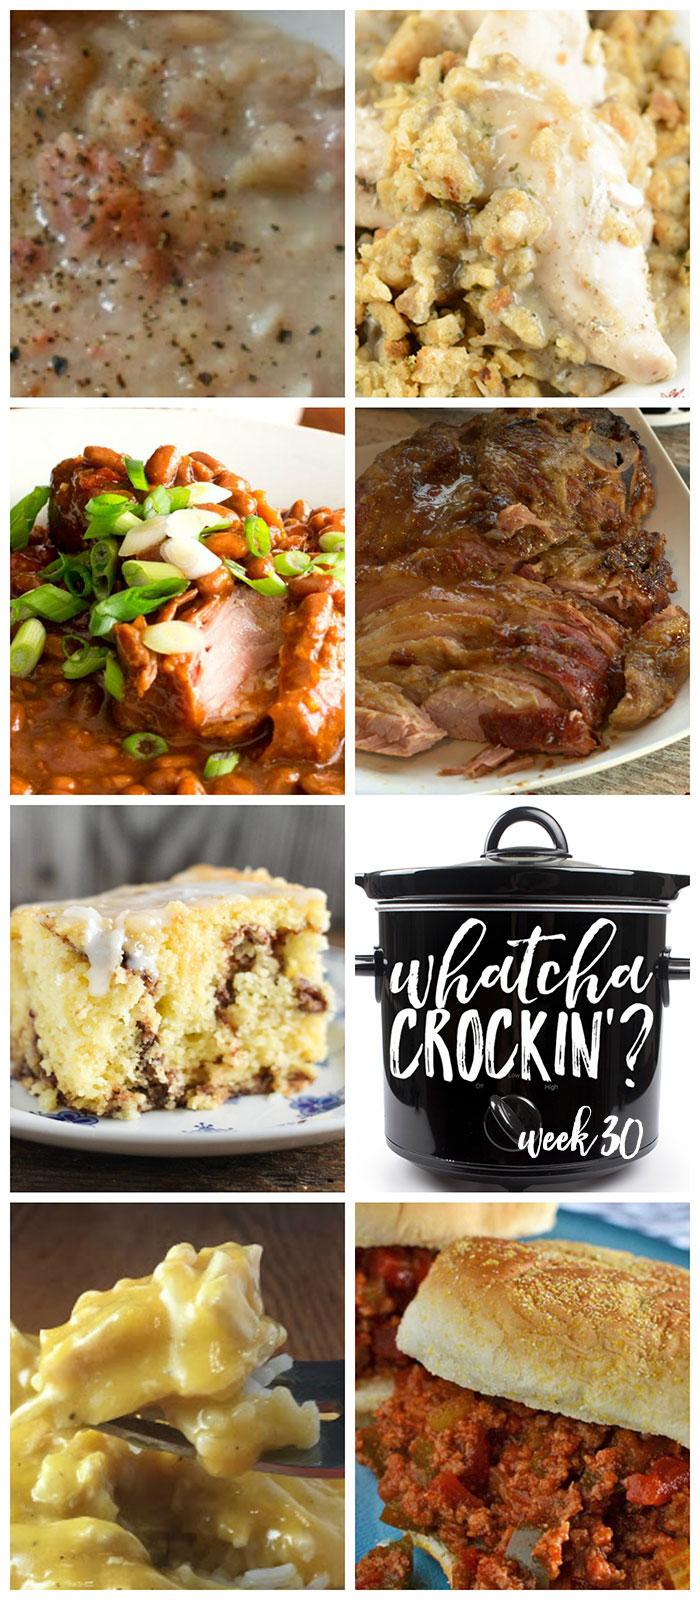 This week's Whatcha Crockin' crock pot recipes include Crock Pot Simple Ham and Bean Soup, Crock Pot Cheesy Chicken and Rice, Crock Pot Chicken and Stuffing Casserole, Crock Pot Coffee Cake, Crock Pot Whisky and Apricot Glazed Ham, Slow Cooker Sloppy Joes, Easy Slow Cooked Country Ribs and Barbecue Beans and much more!